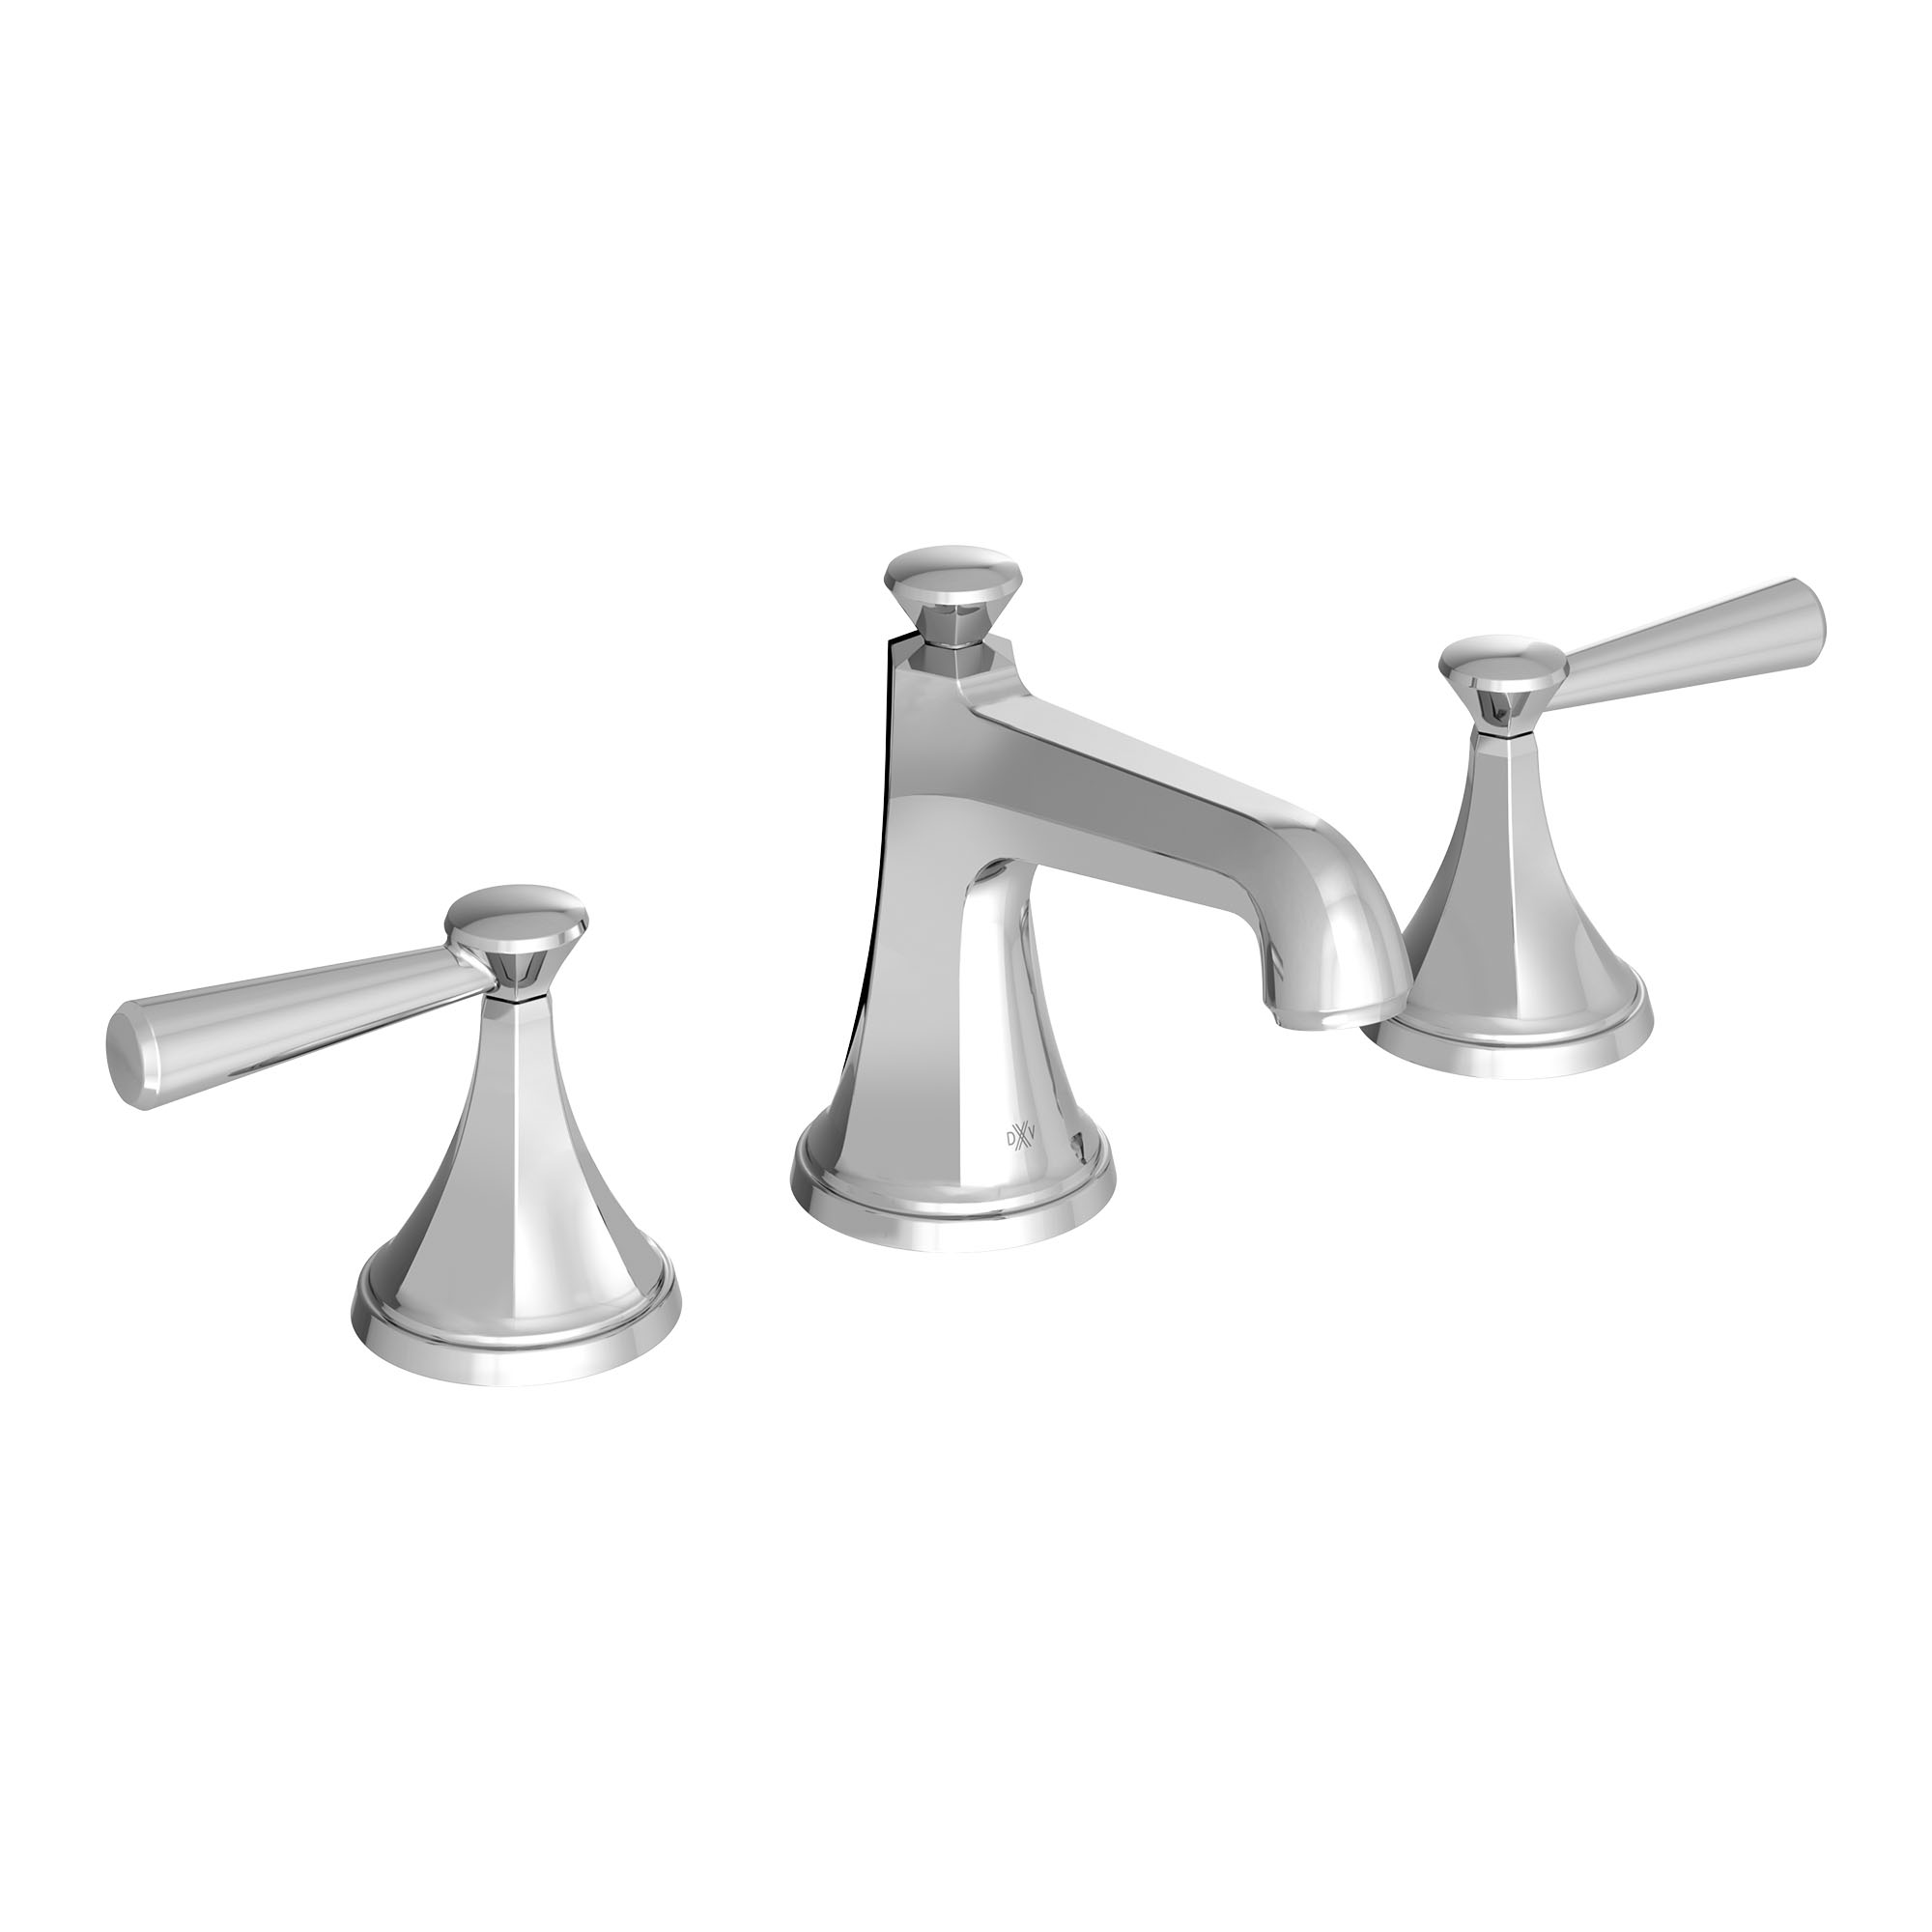 Fitzgerald 2-Handle Widespread Bathroom Faucet with Lever Handles